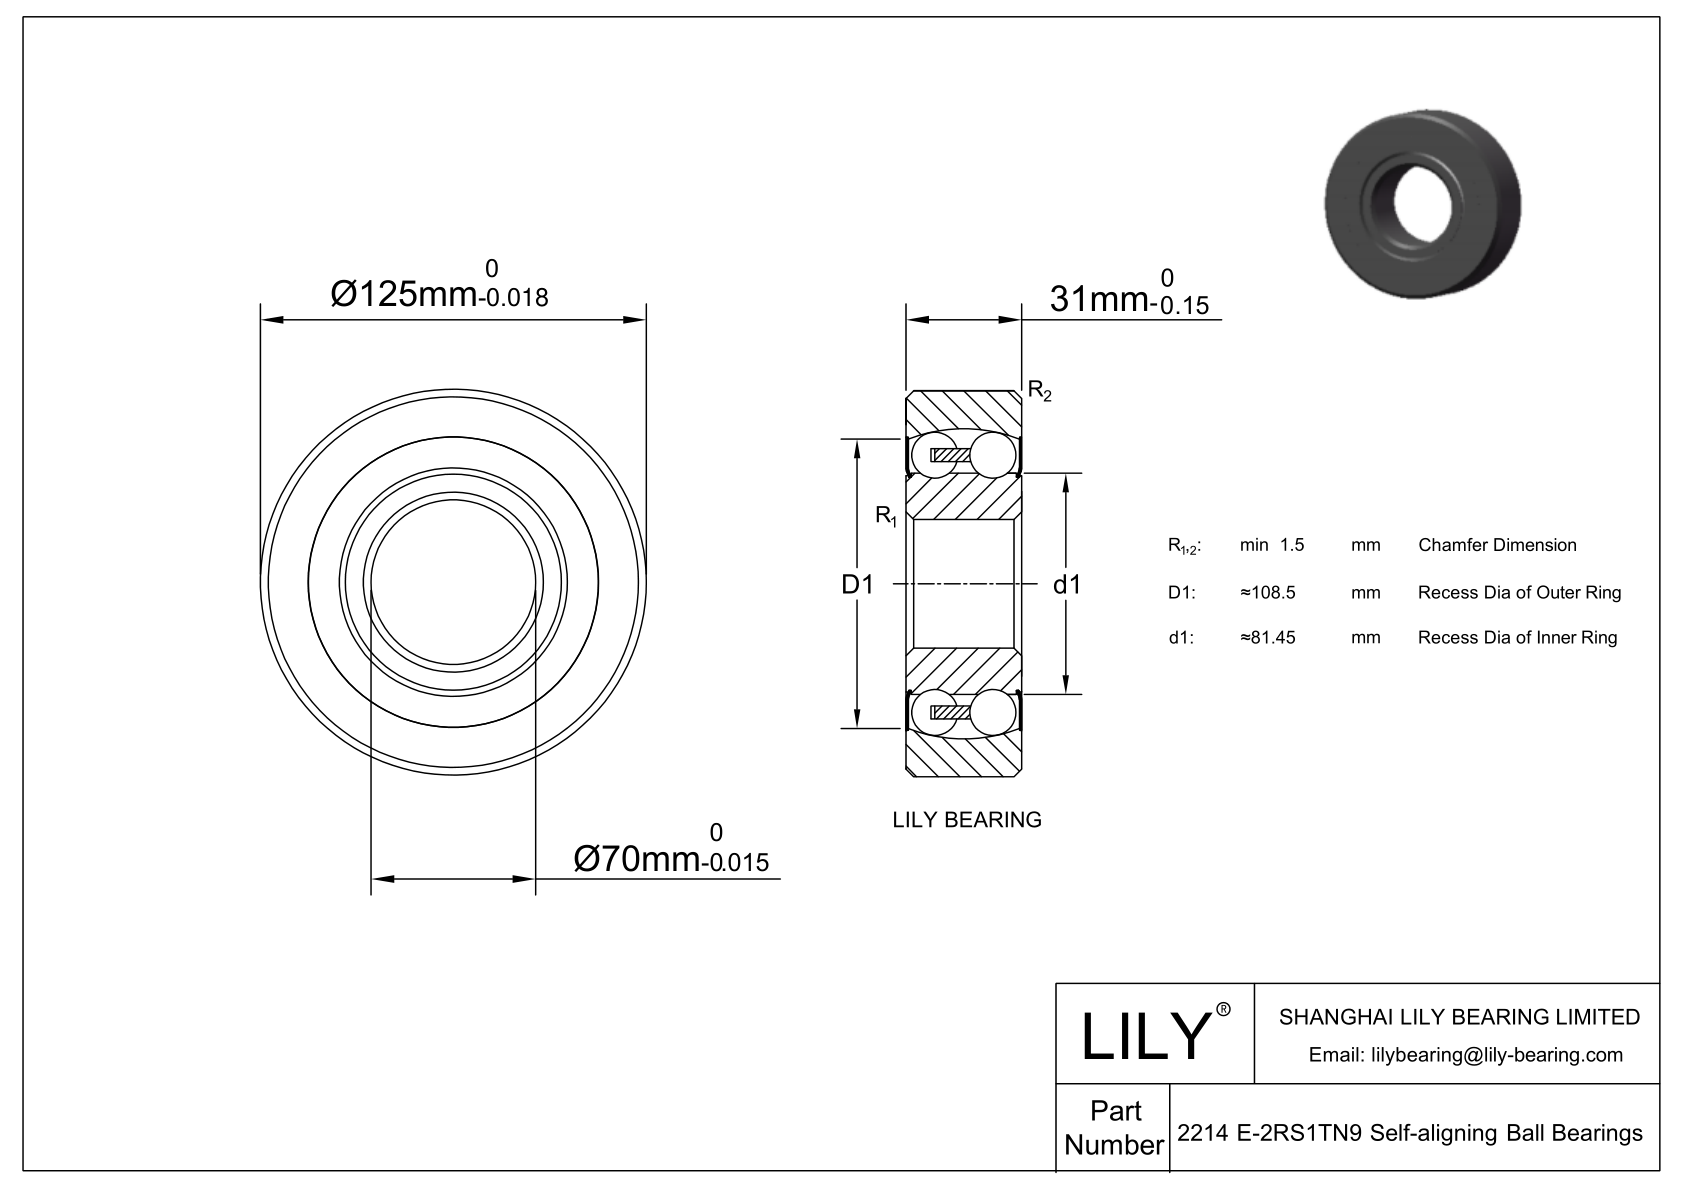 CE2214 E-SCPP Silicon Carbide Self Aligning Ball Bearings cad drawing